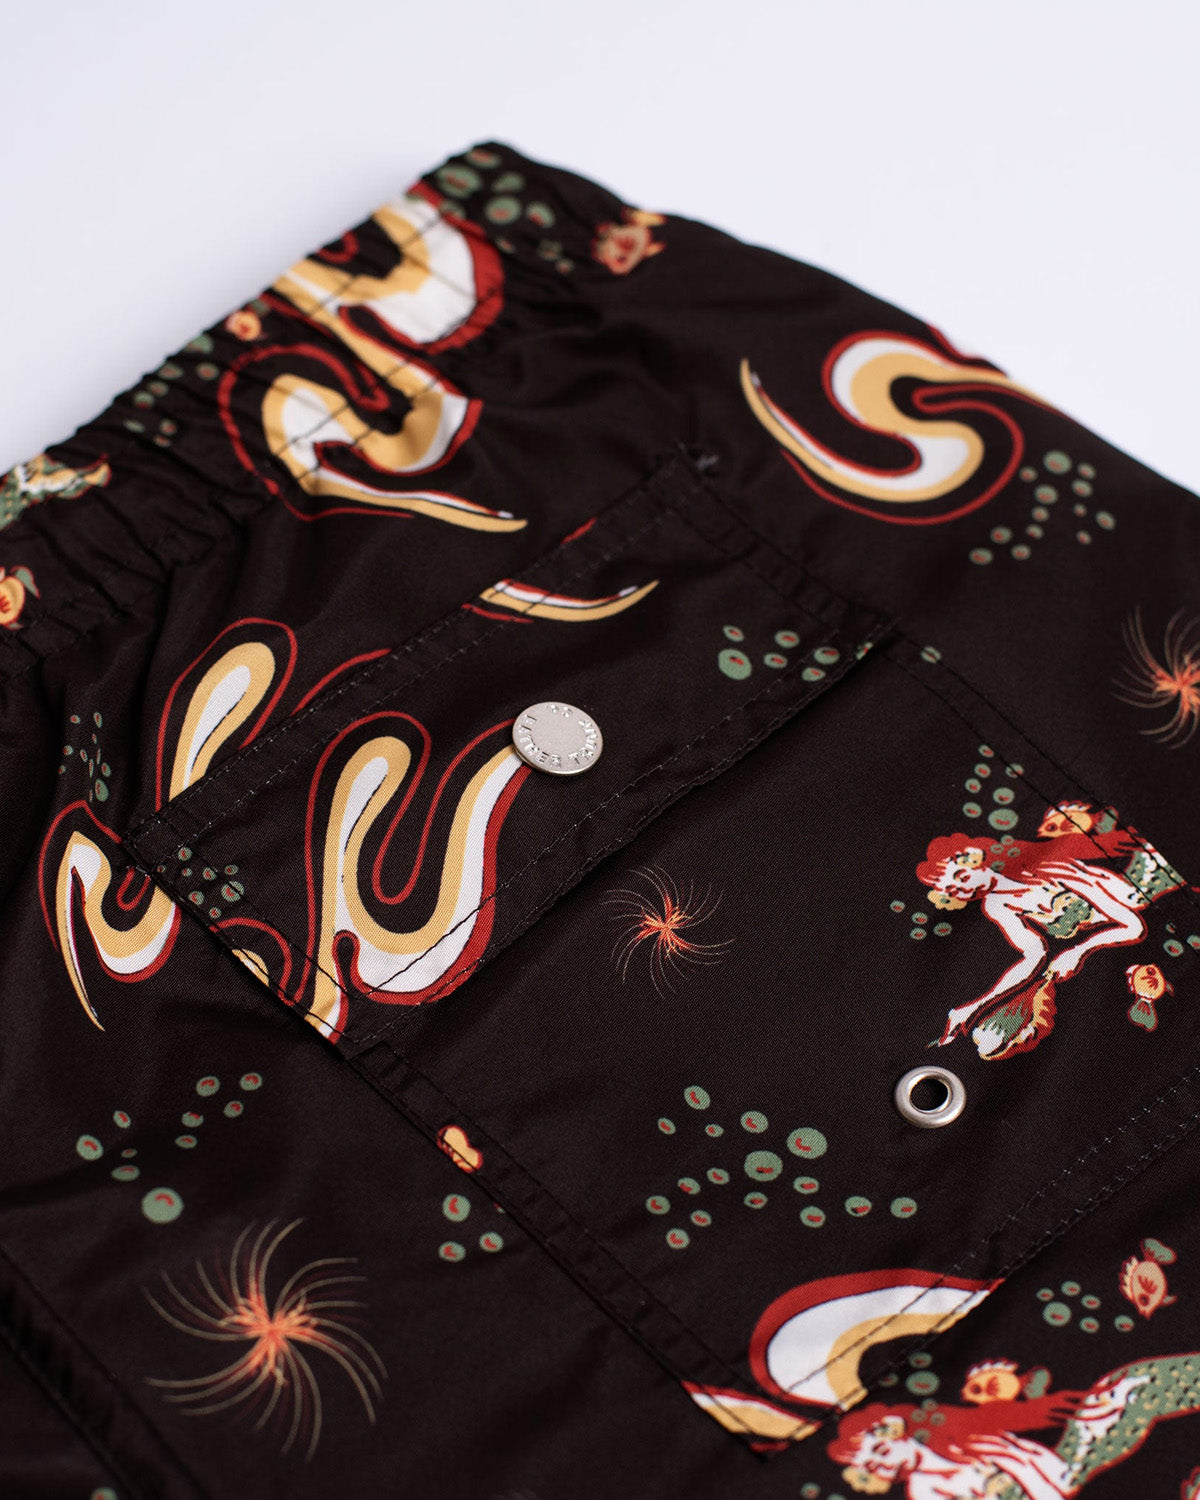 Close up of Black Bather swim trunk with siren pattern